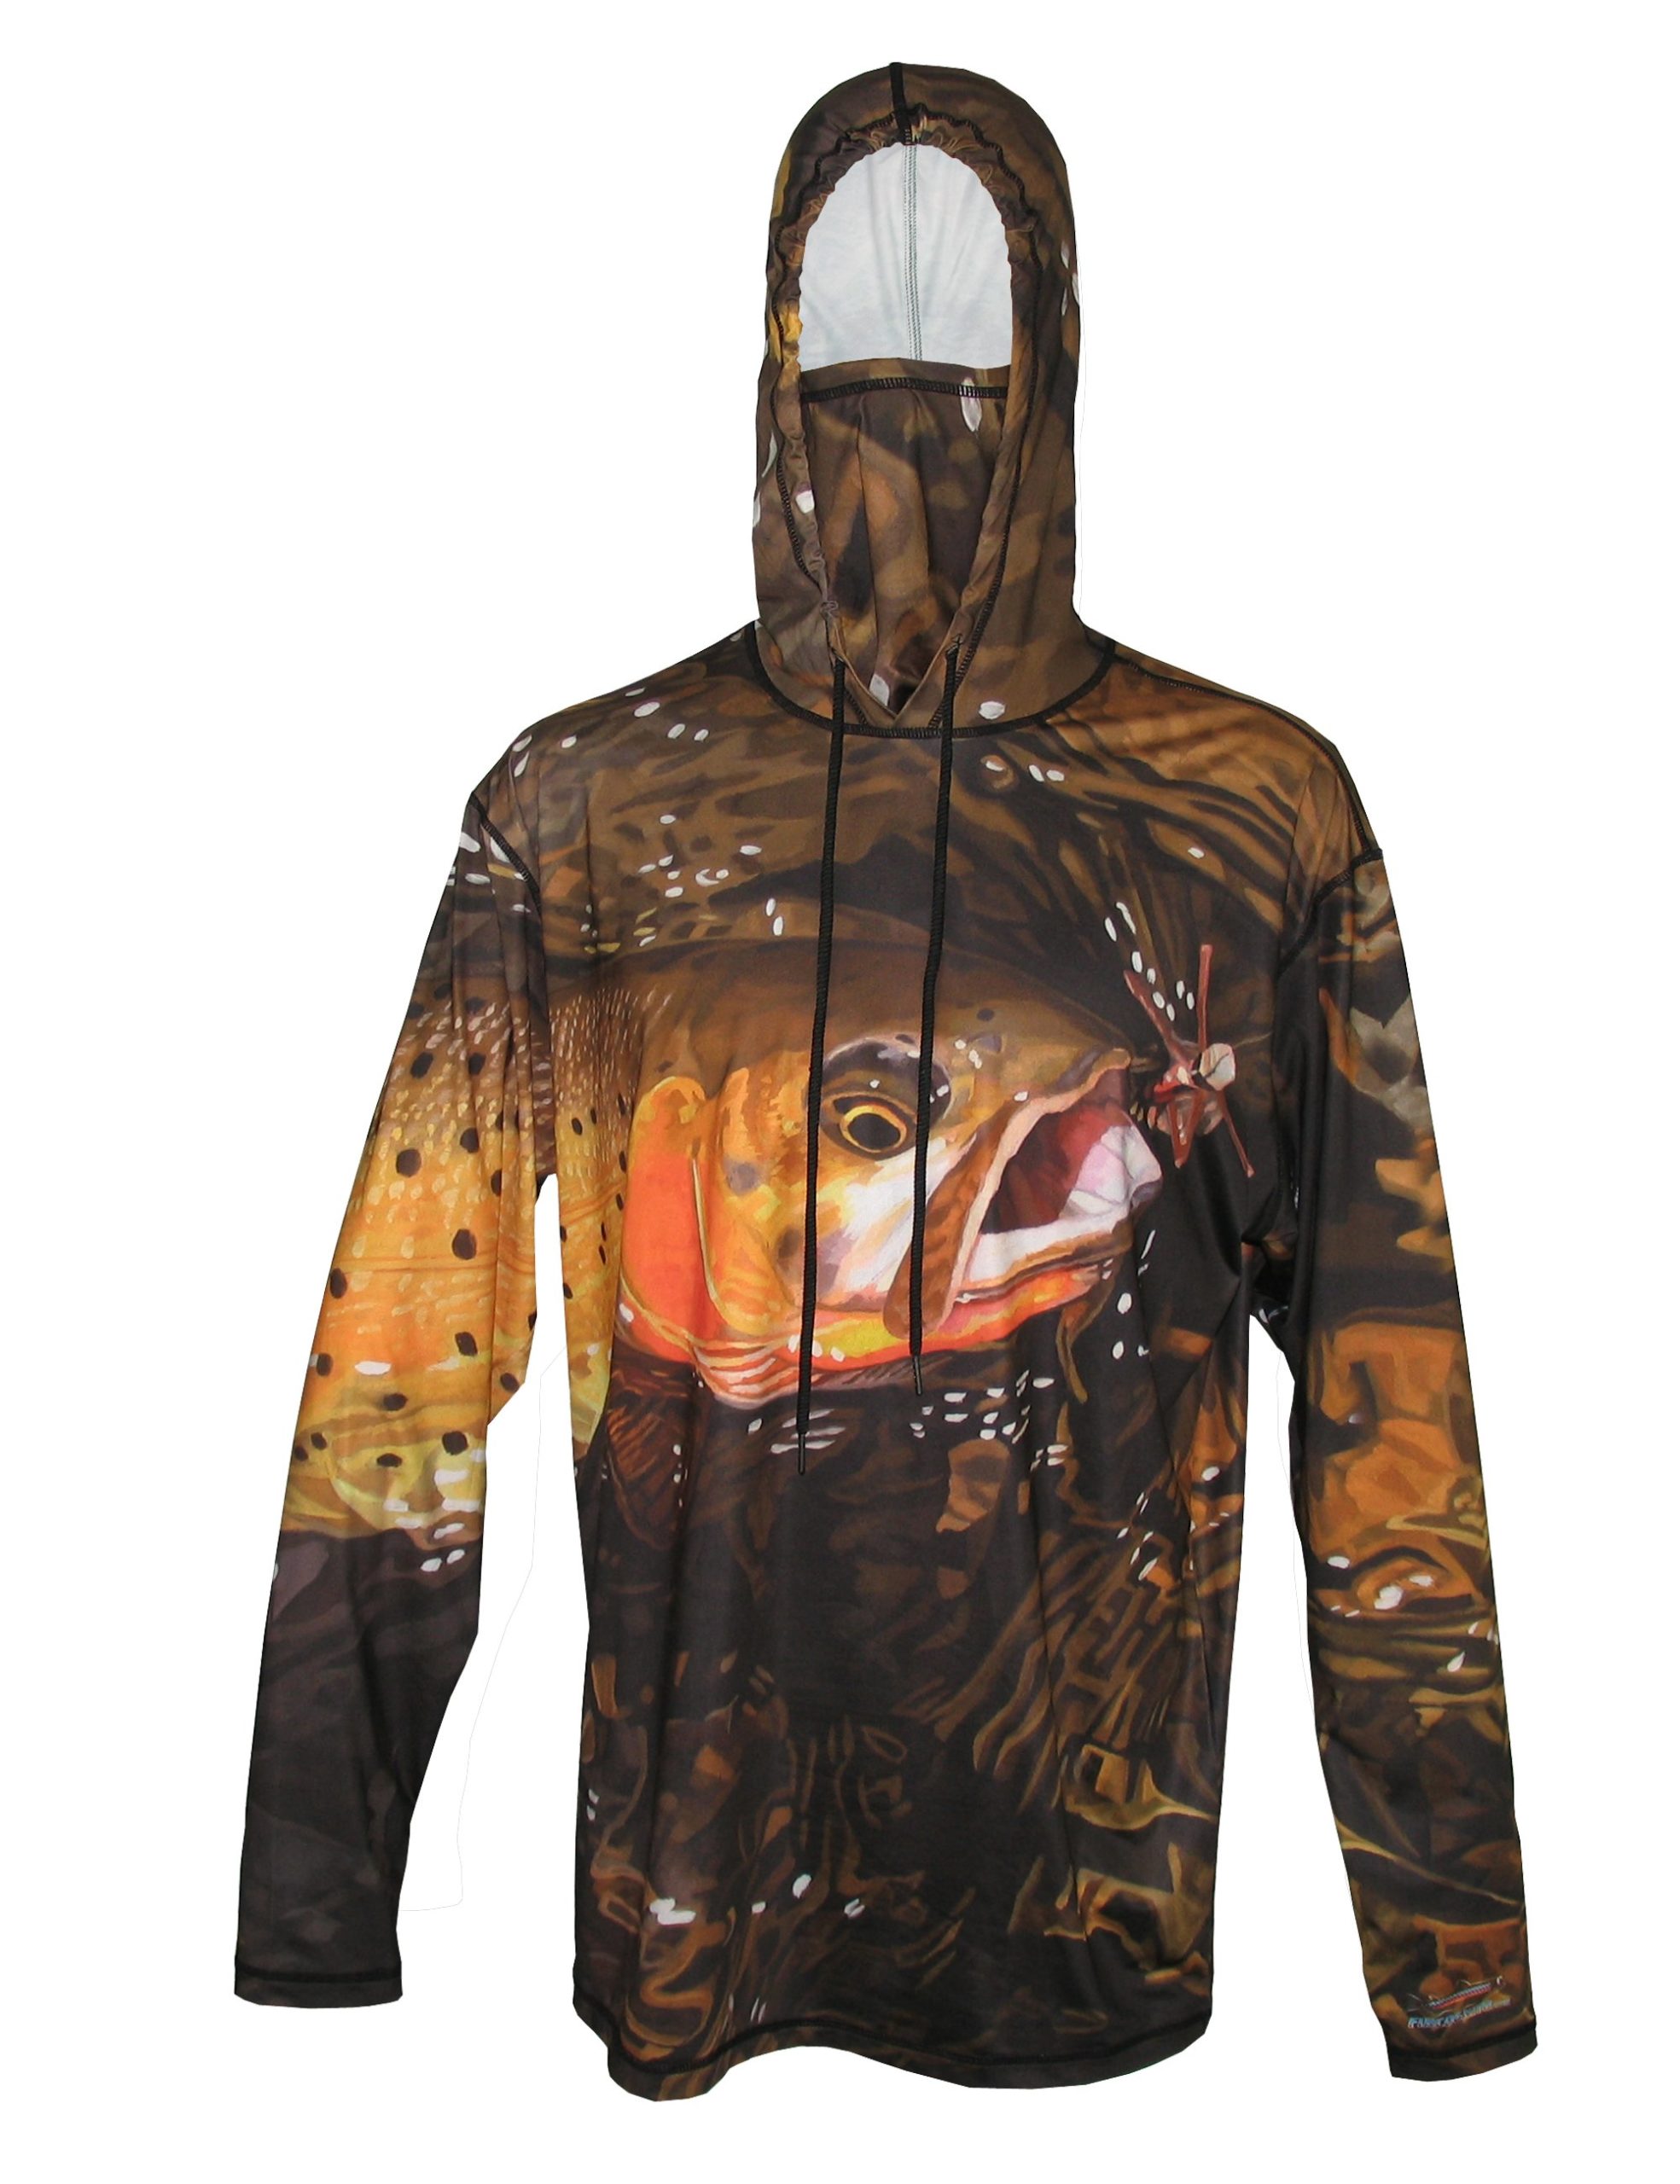 Cutty Graphic Fishing Hoodie is Fly Fishing Apparel on the trail as Hiking Clothes making life better. Get yours today Enjoy Life Click Here